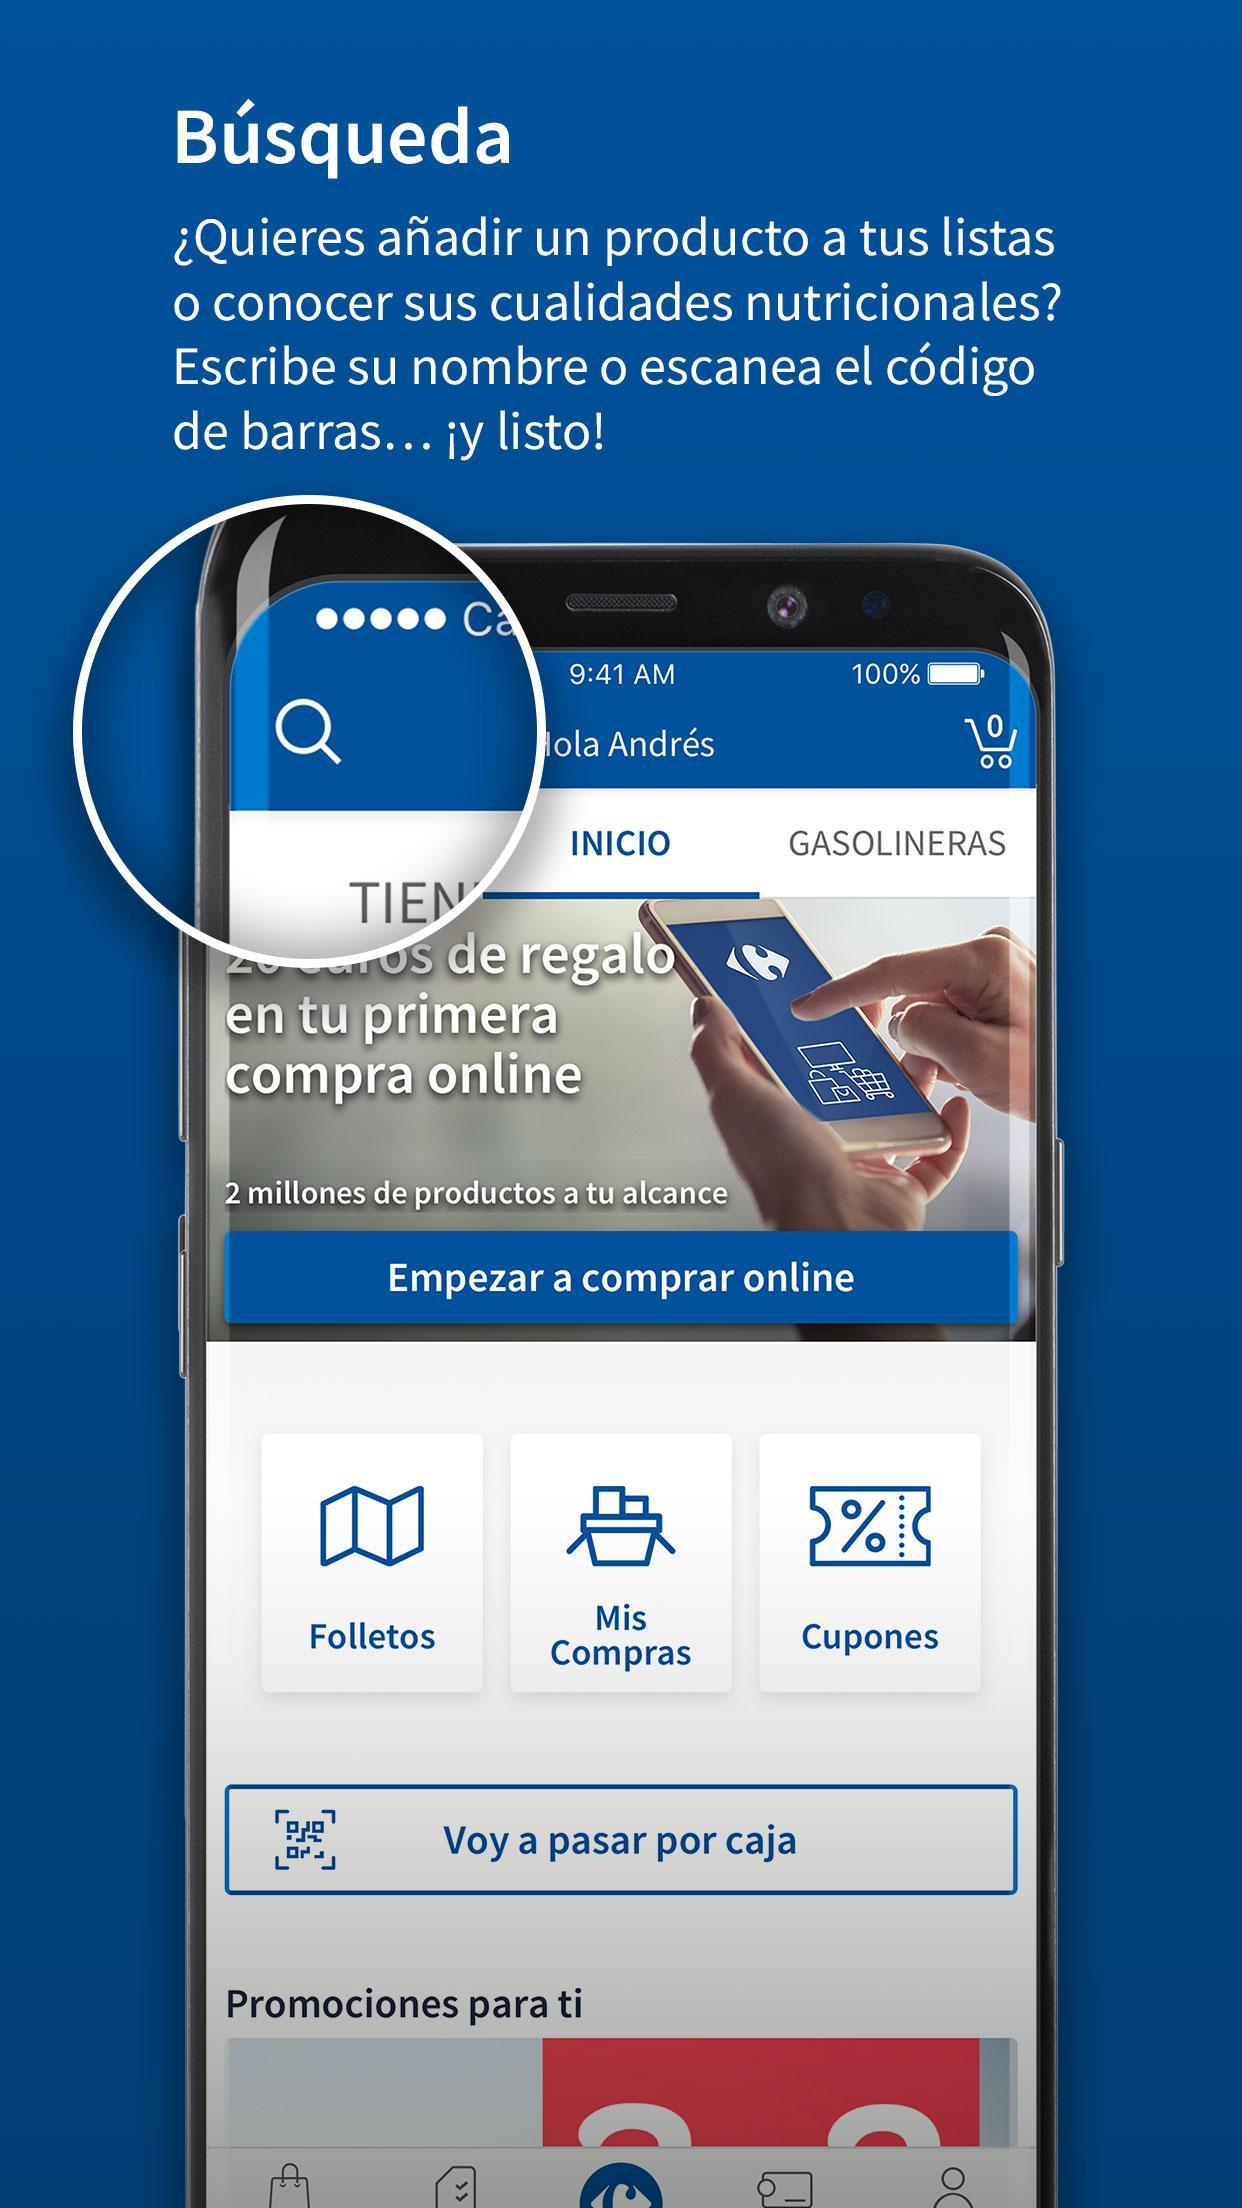 Mi Carrefour for Android - APK Download